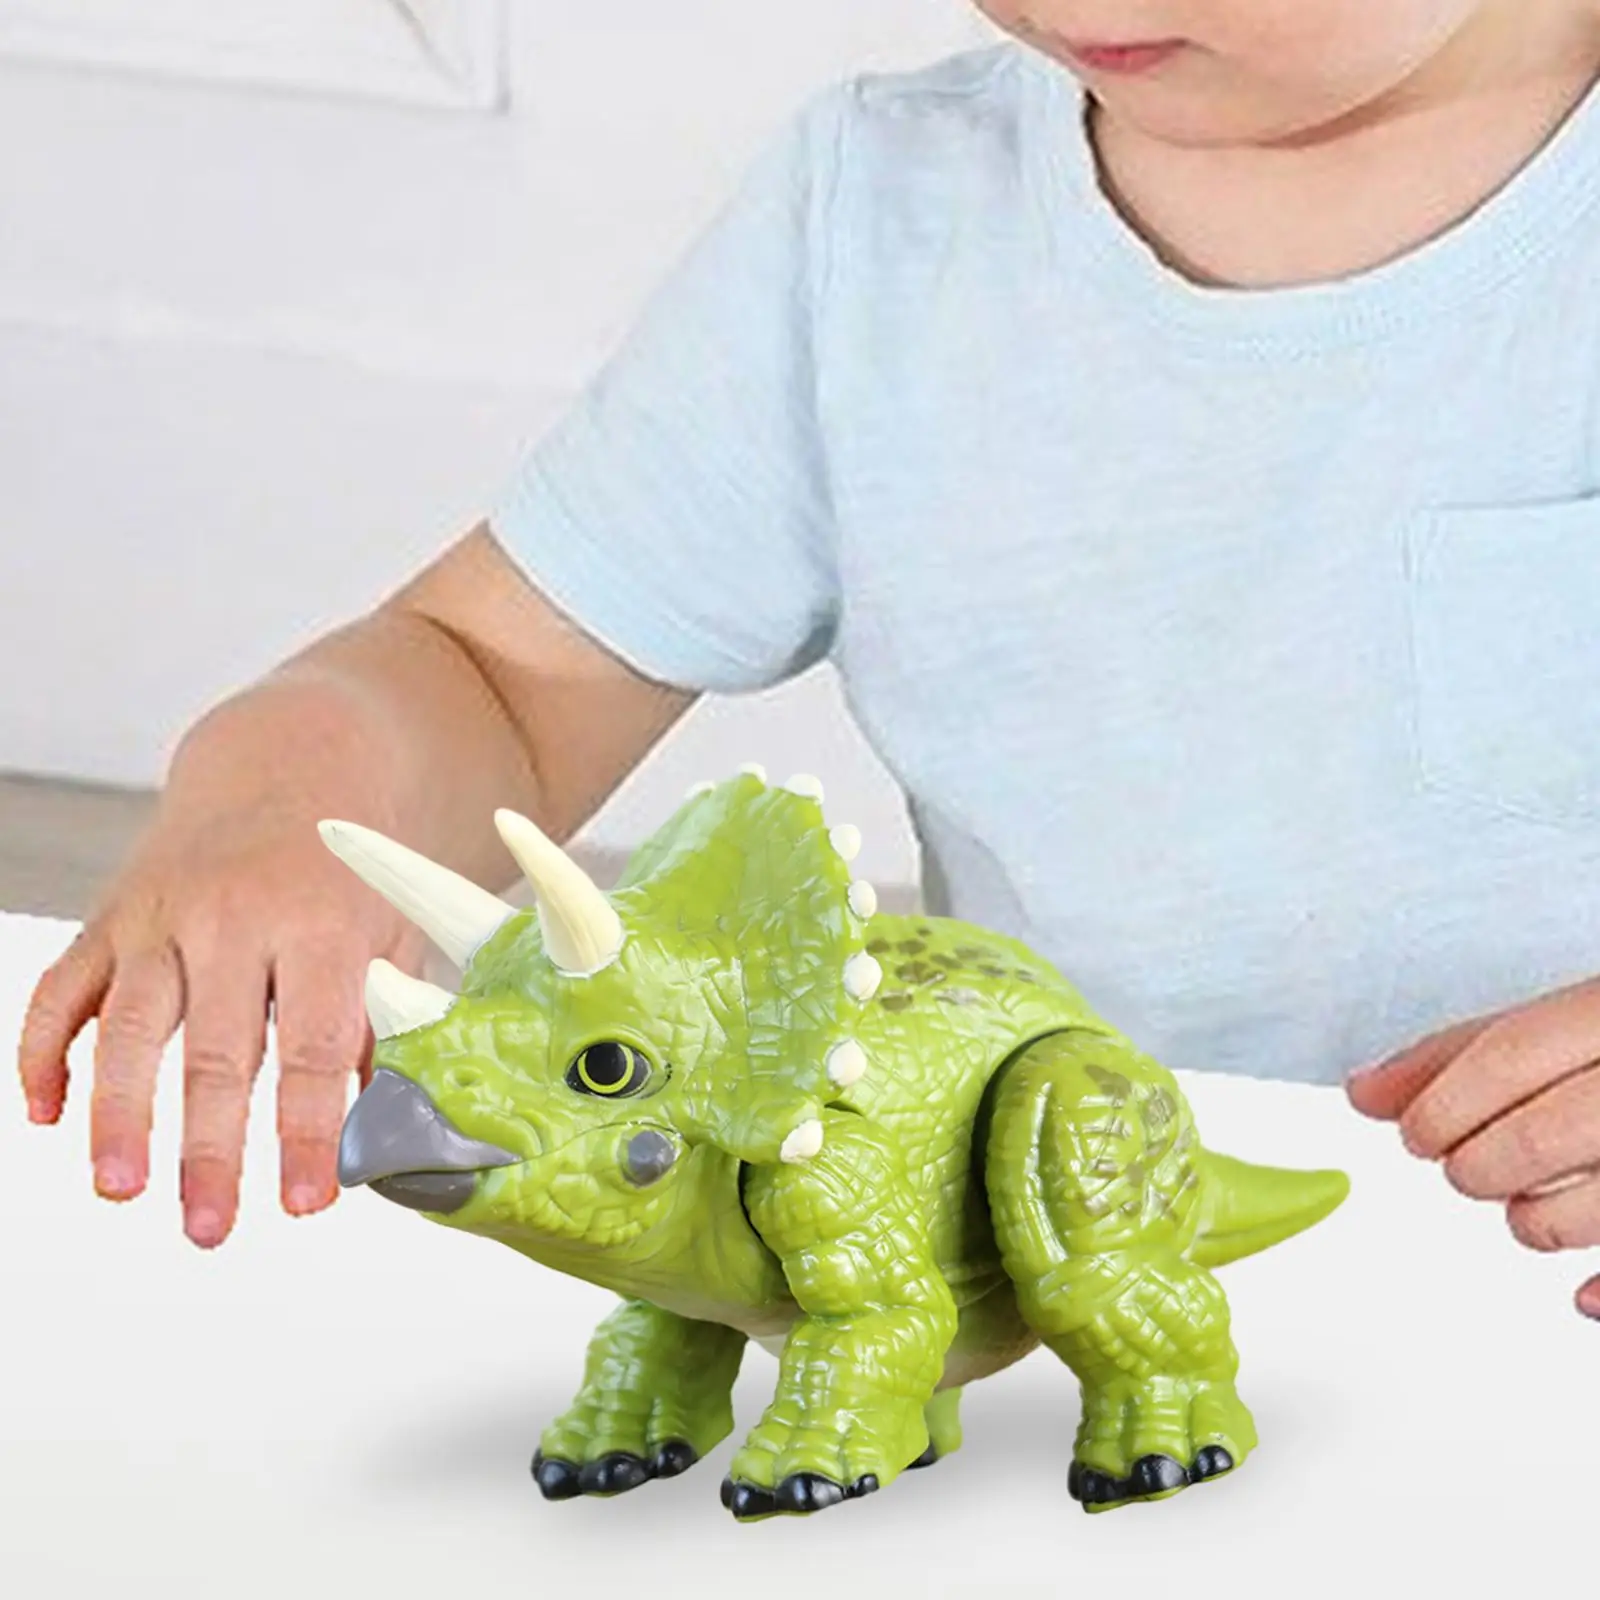 Dinosaur Figure Toy Animal Figurine Model, Realistic Figure Simulated Dinosaur Toy, Movable Joints for Party Favors Gift Cars